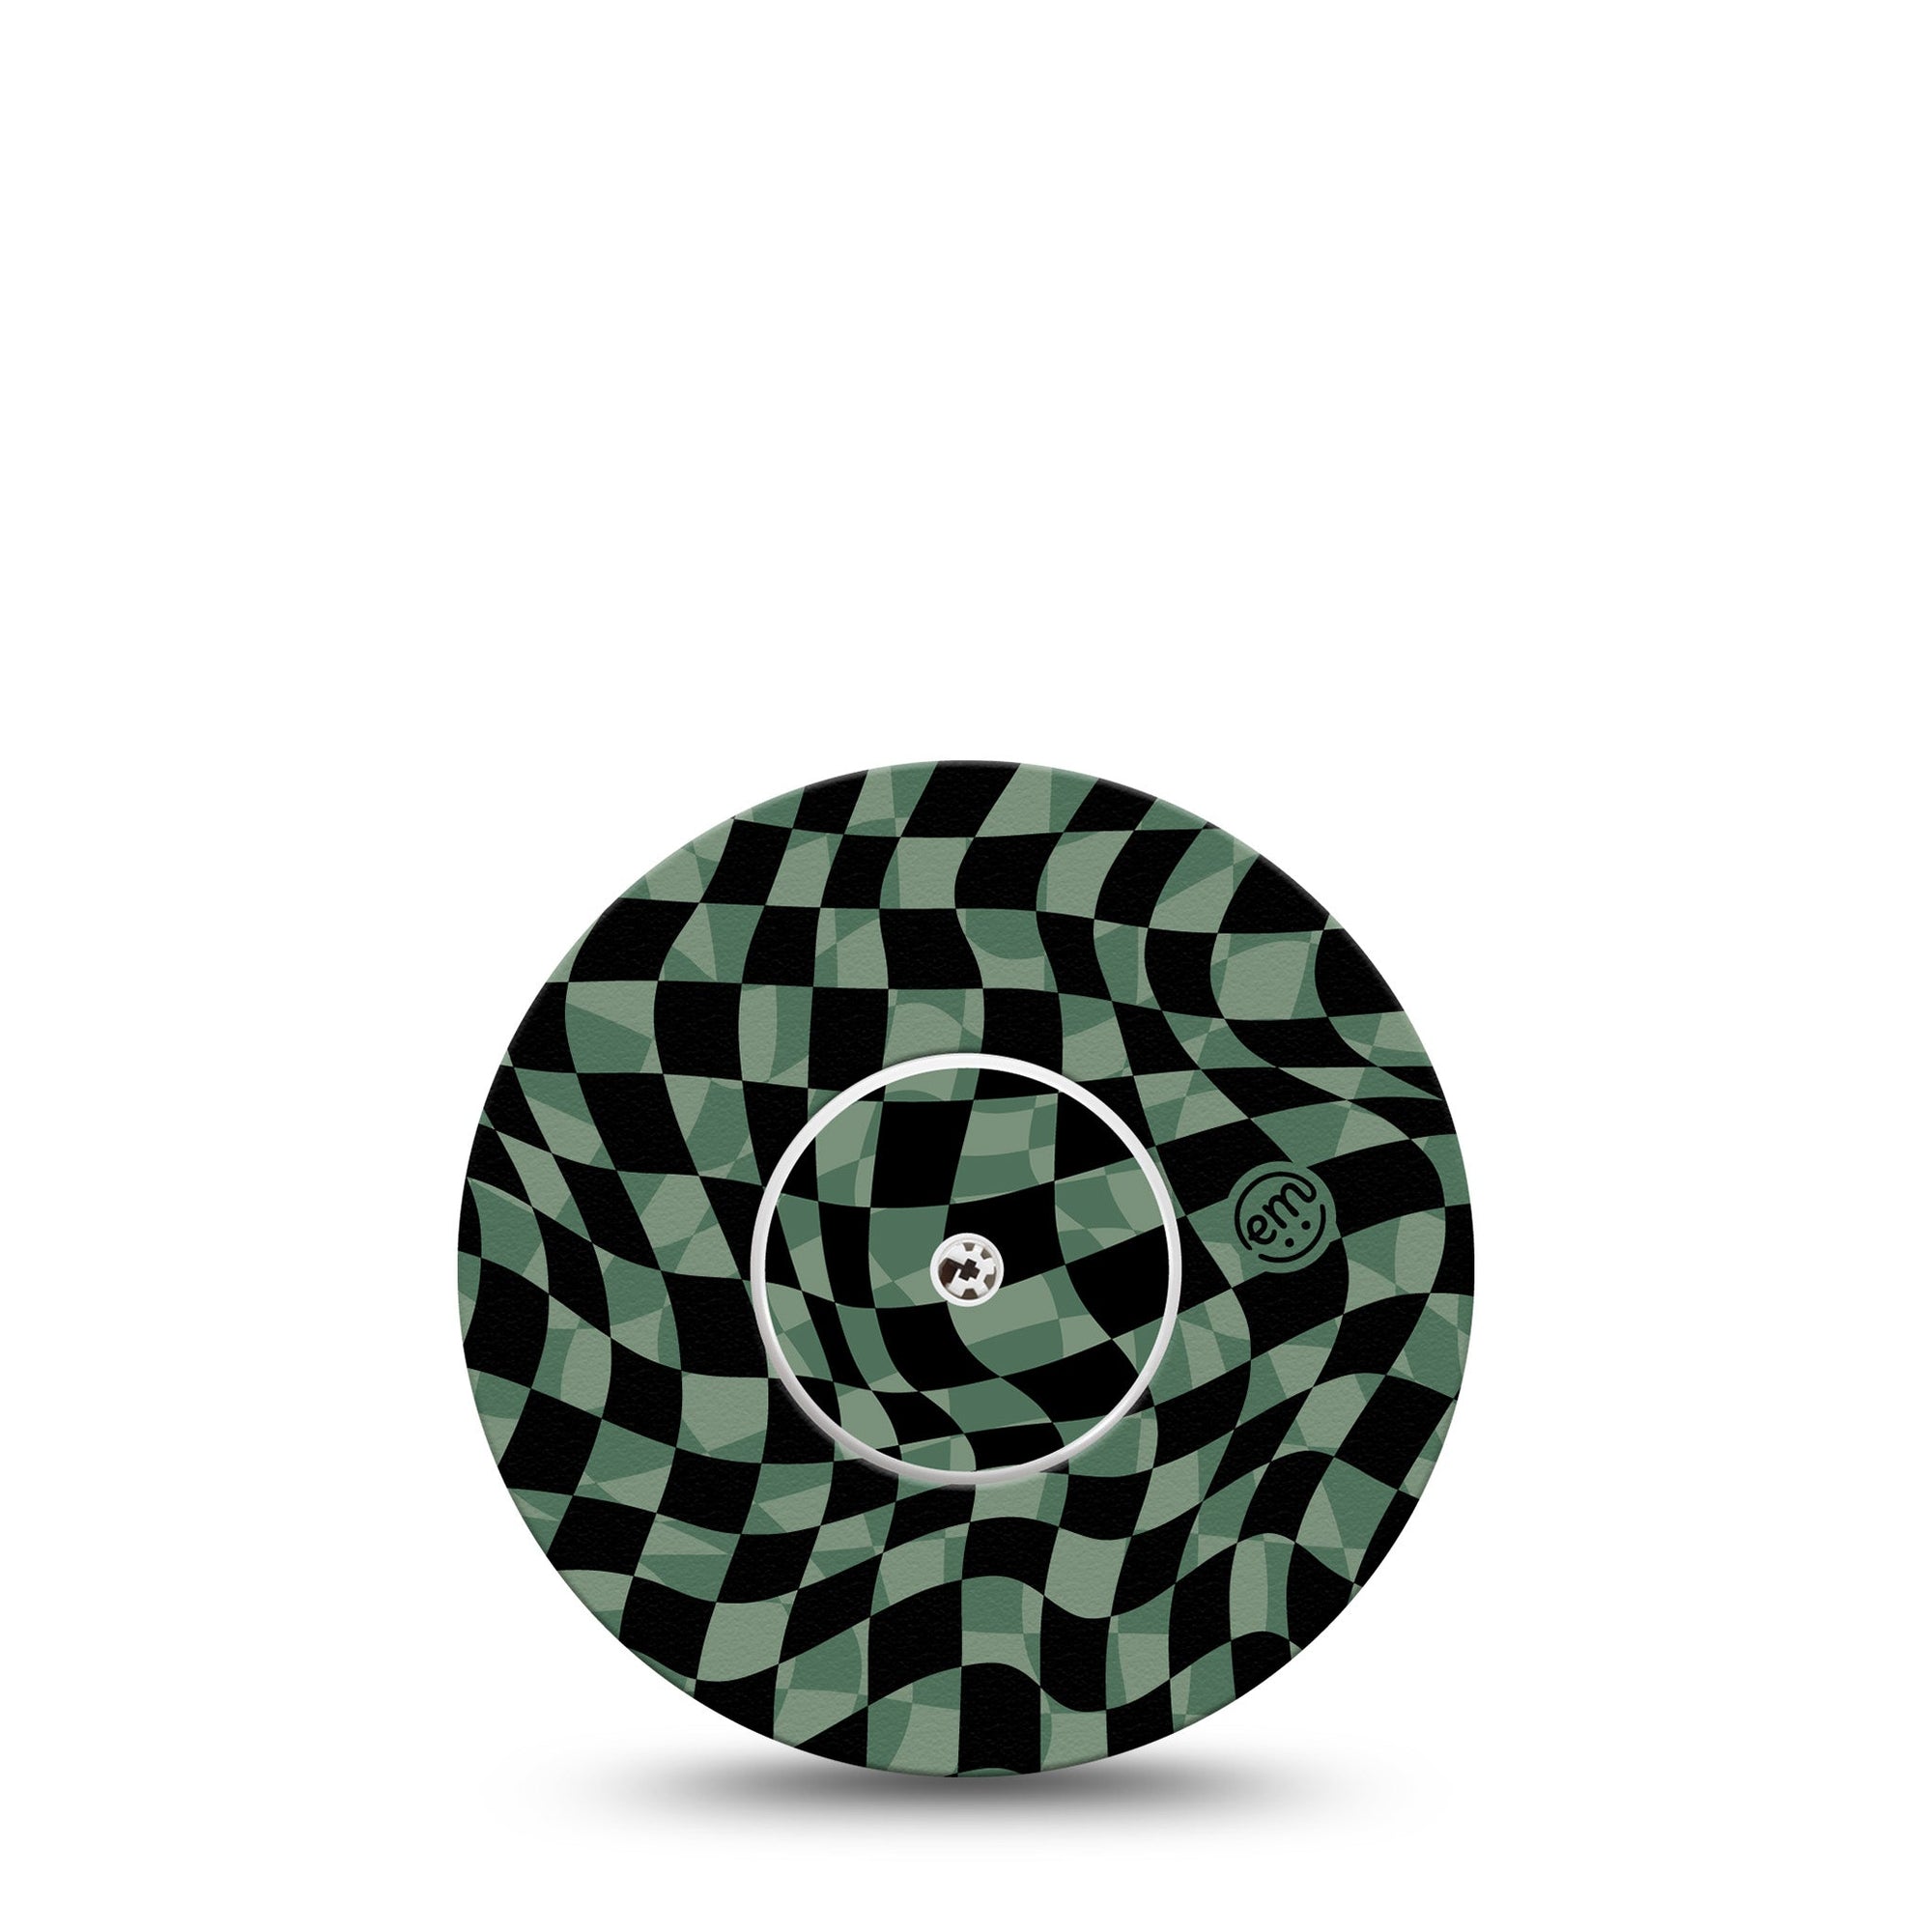 ExpressionMed Green & Black Checkerboard Freestyle Libre Transmitter Sticker and Tape, Chessboard Design, CGM Adhesive Sticker and Tape Pairing, Abbott Lingo